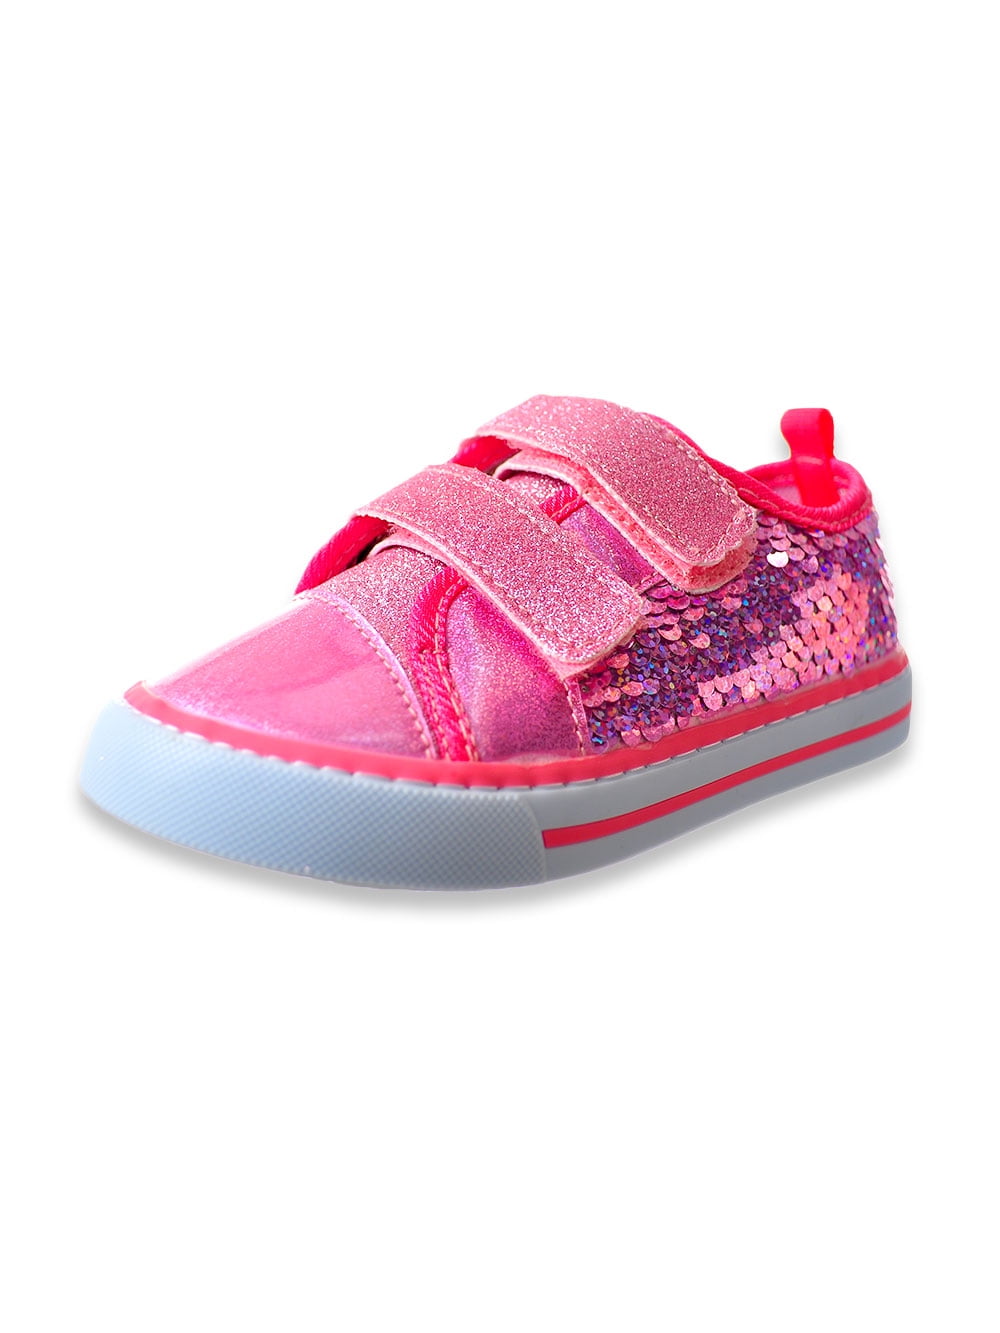 Children Baby Kids Girl Shoes Bling Sequins Bow Crystal Run Sport Sneakers Shoes